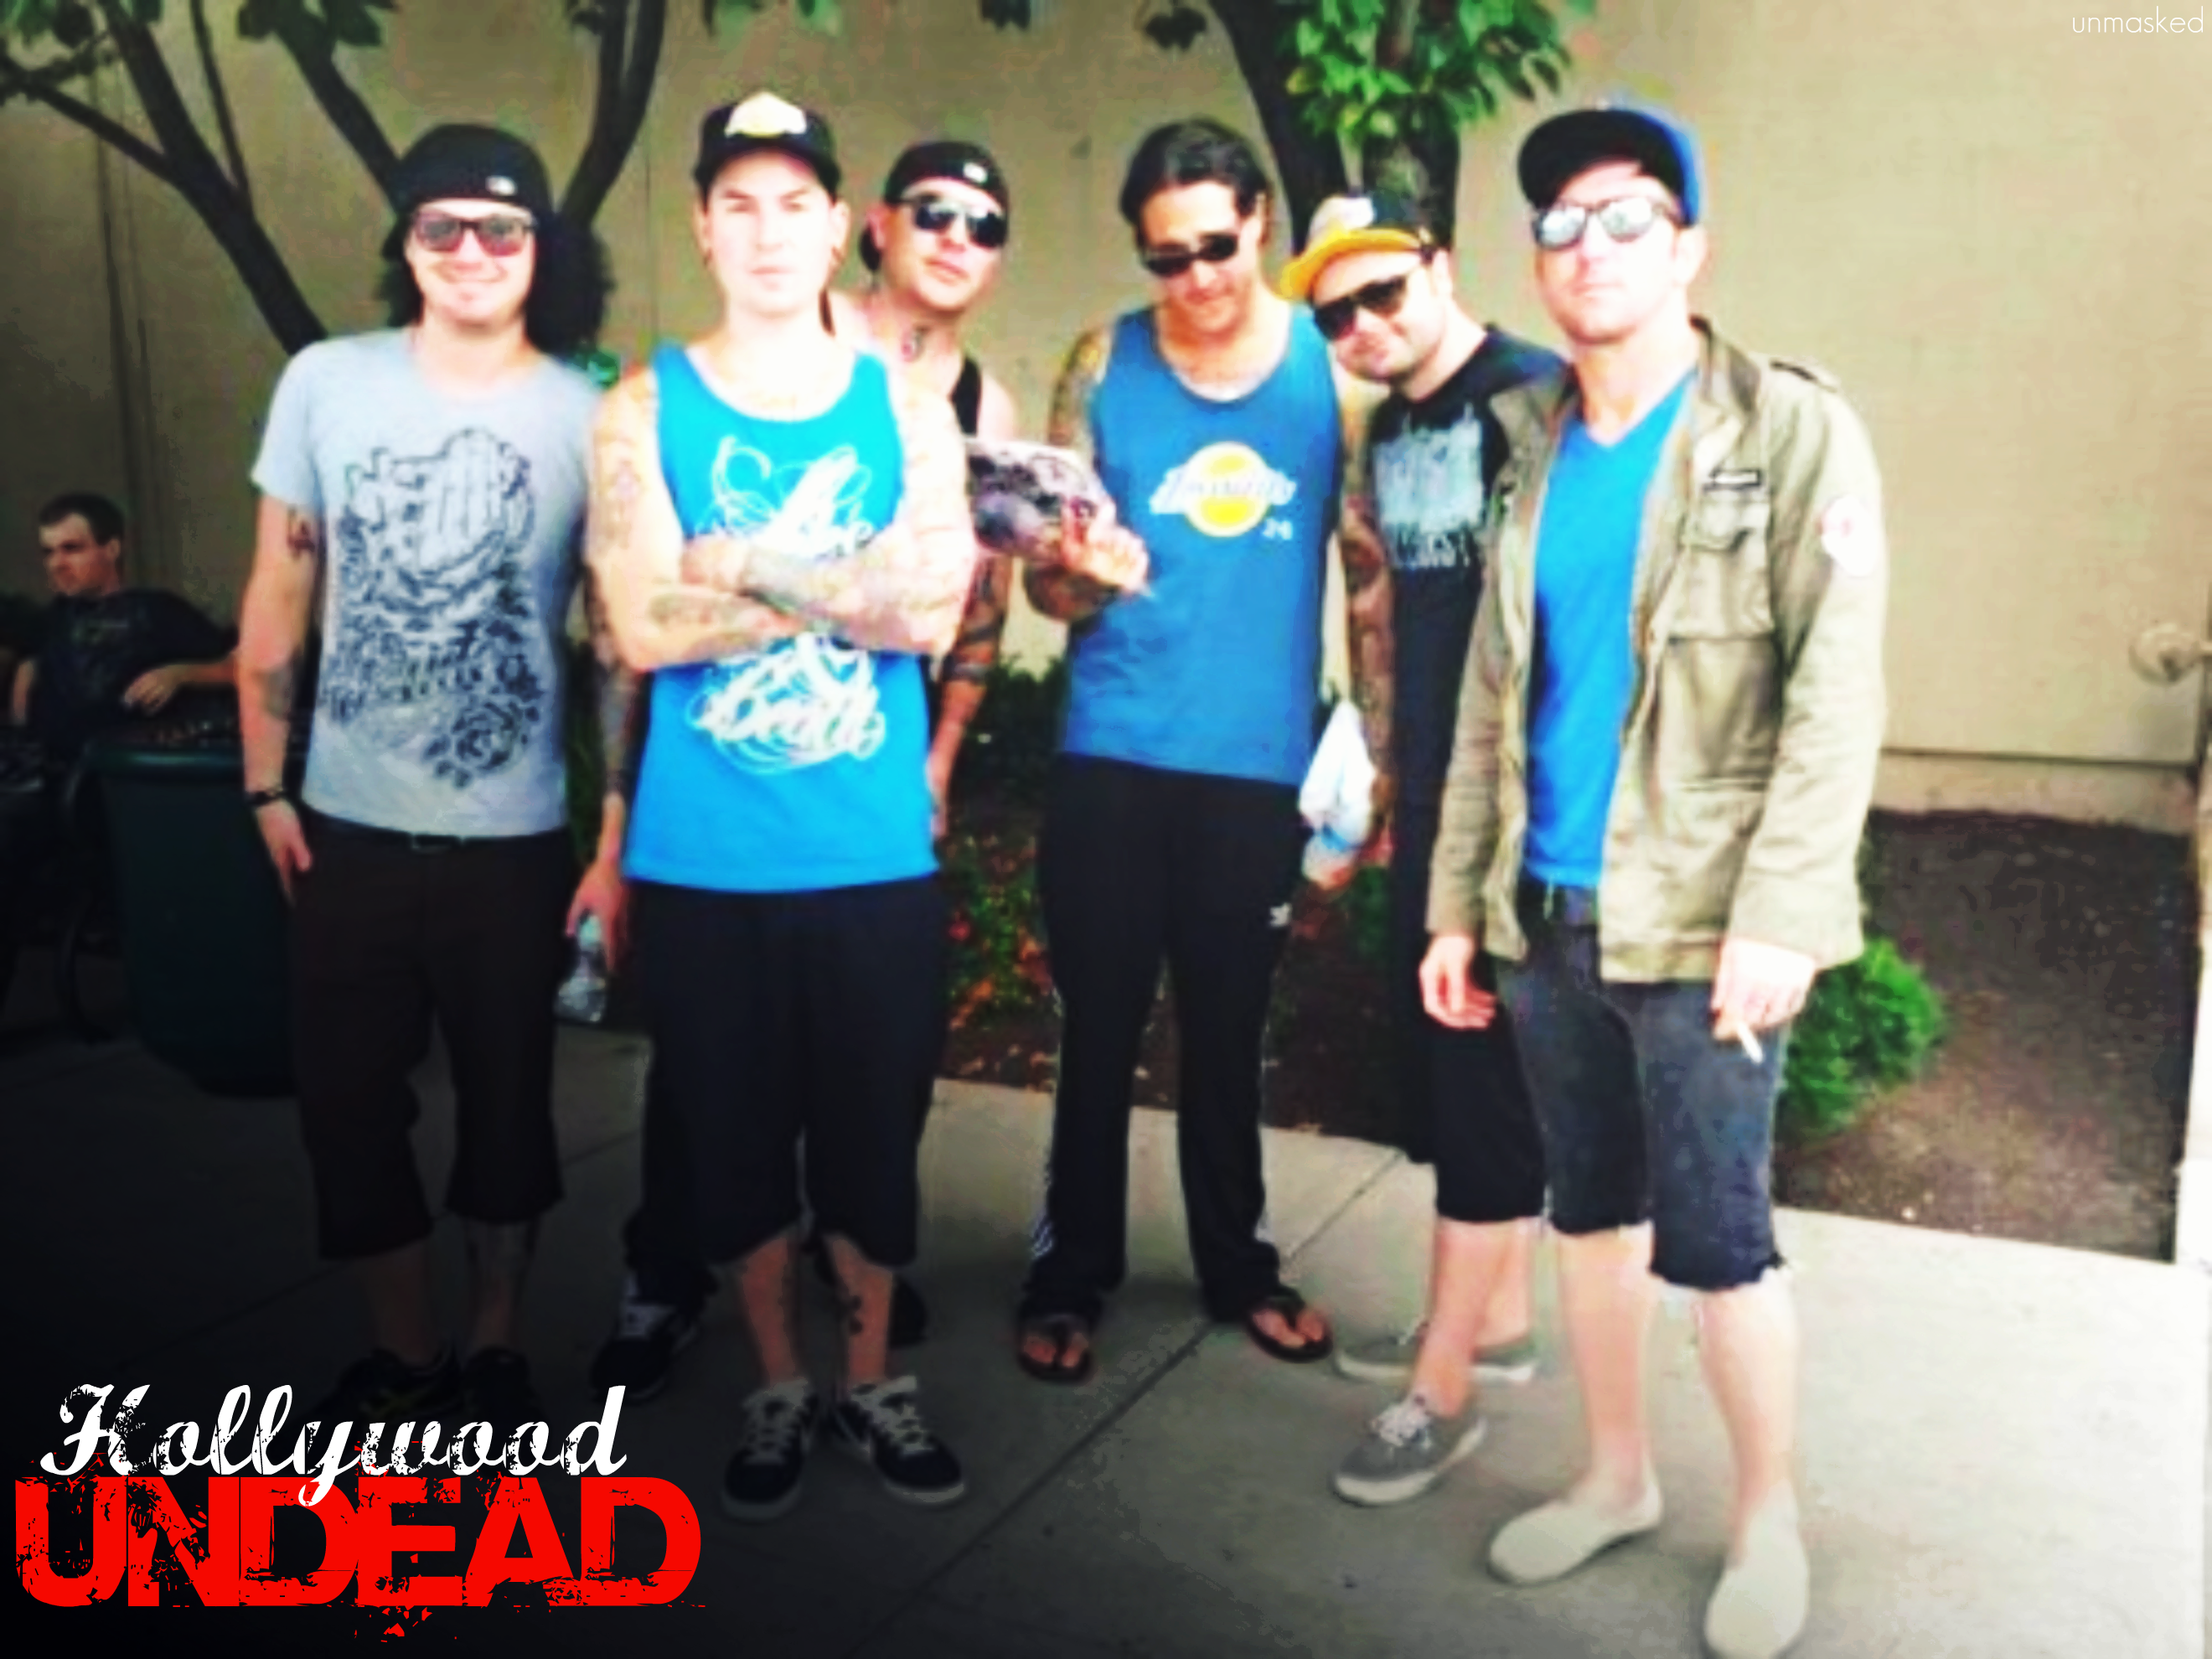 Hollywood Undead   Wallpaper 6 by WelcometoBloodstone on